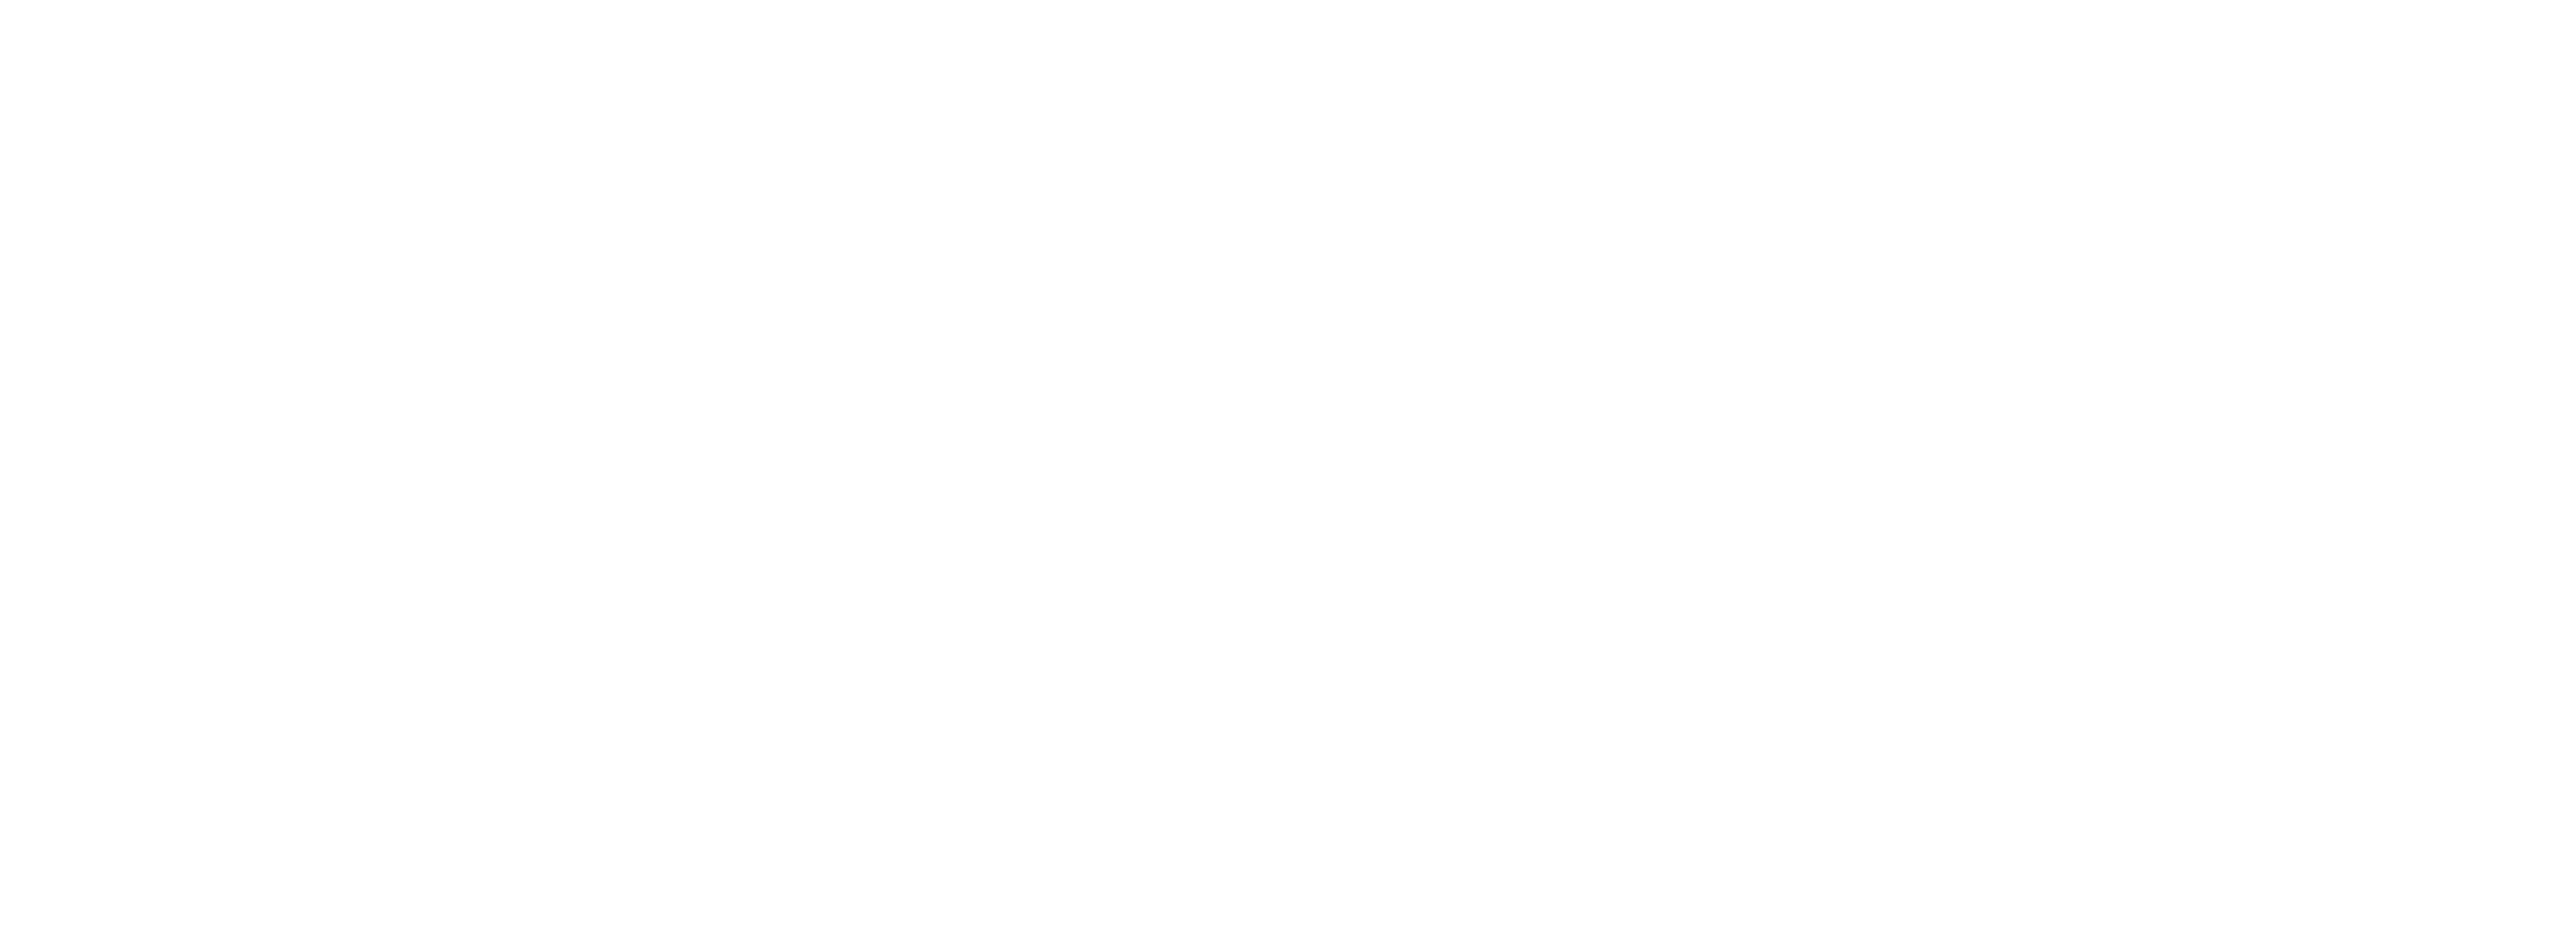 Wasted Brand